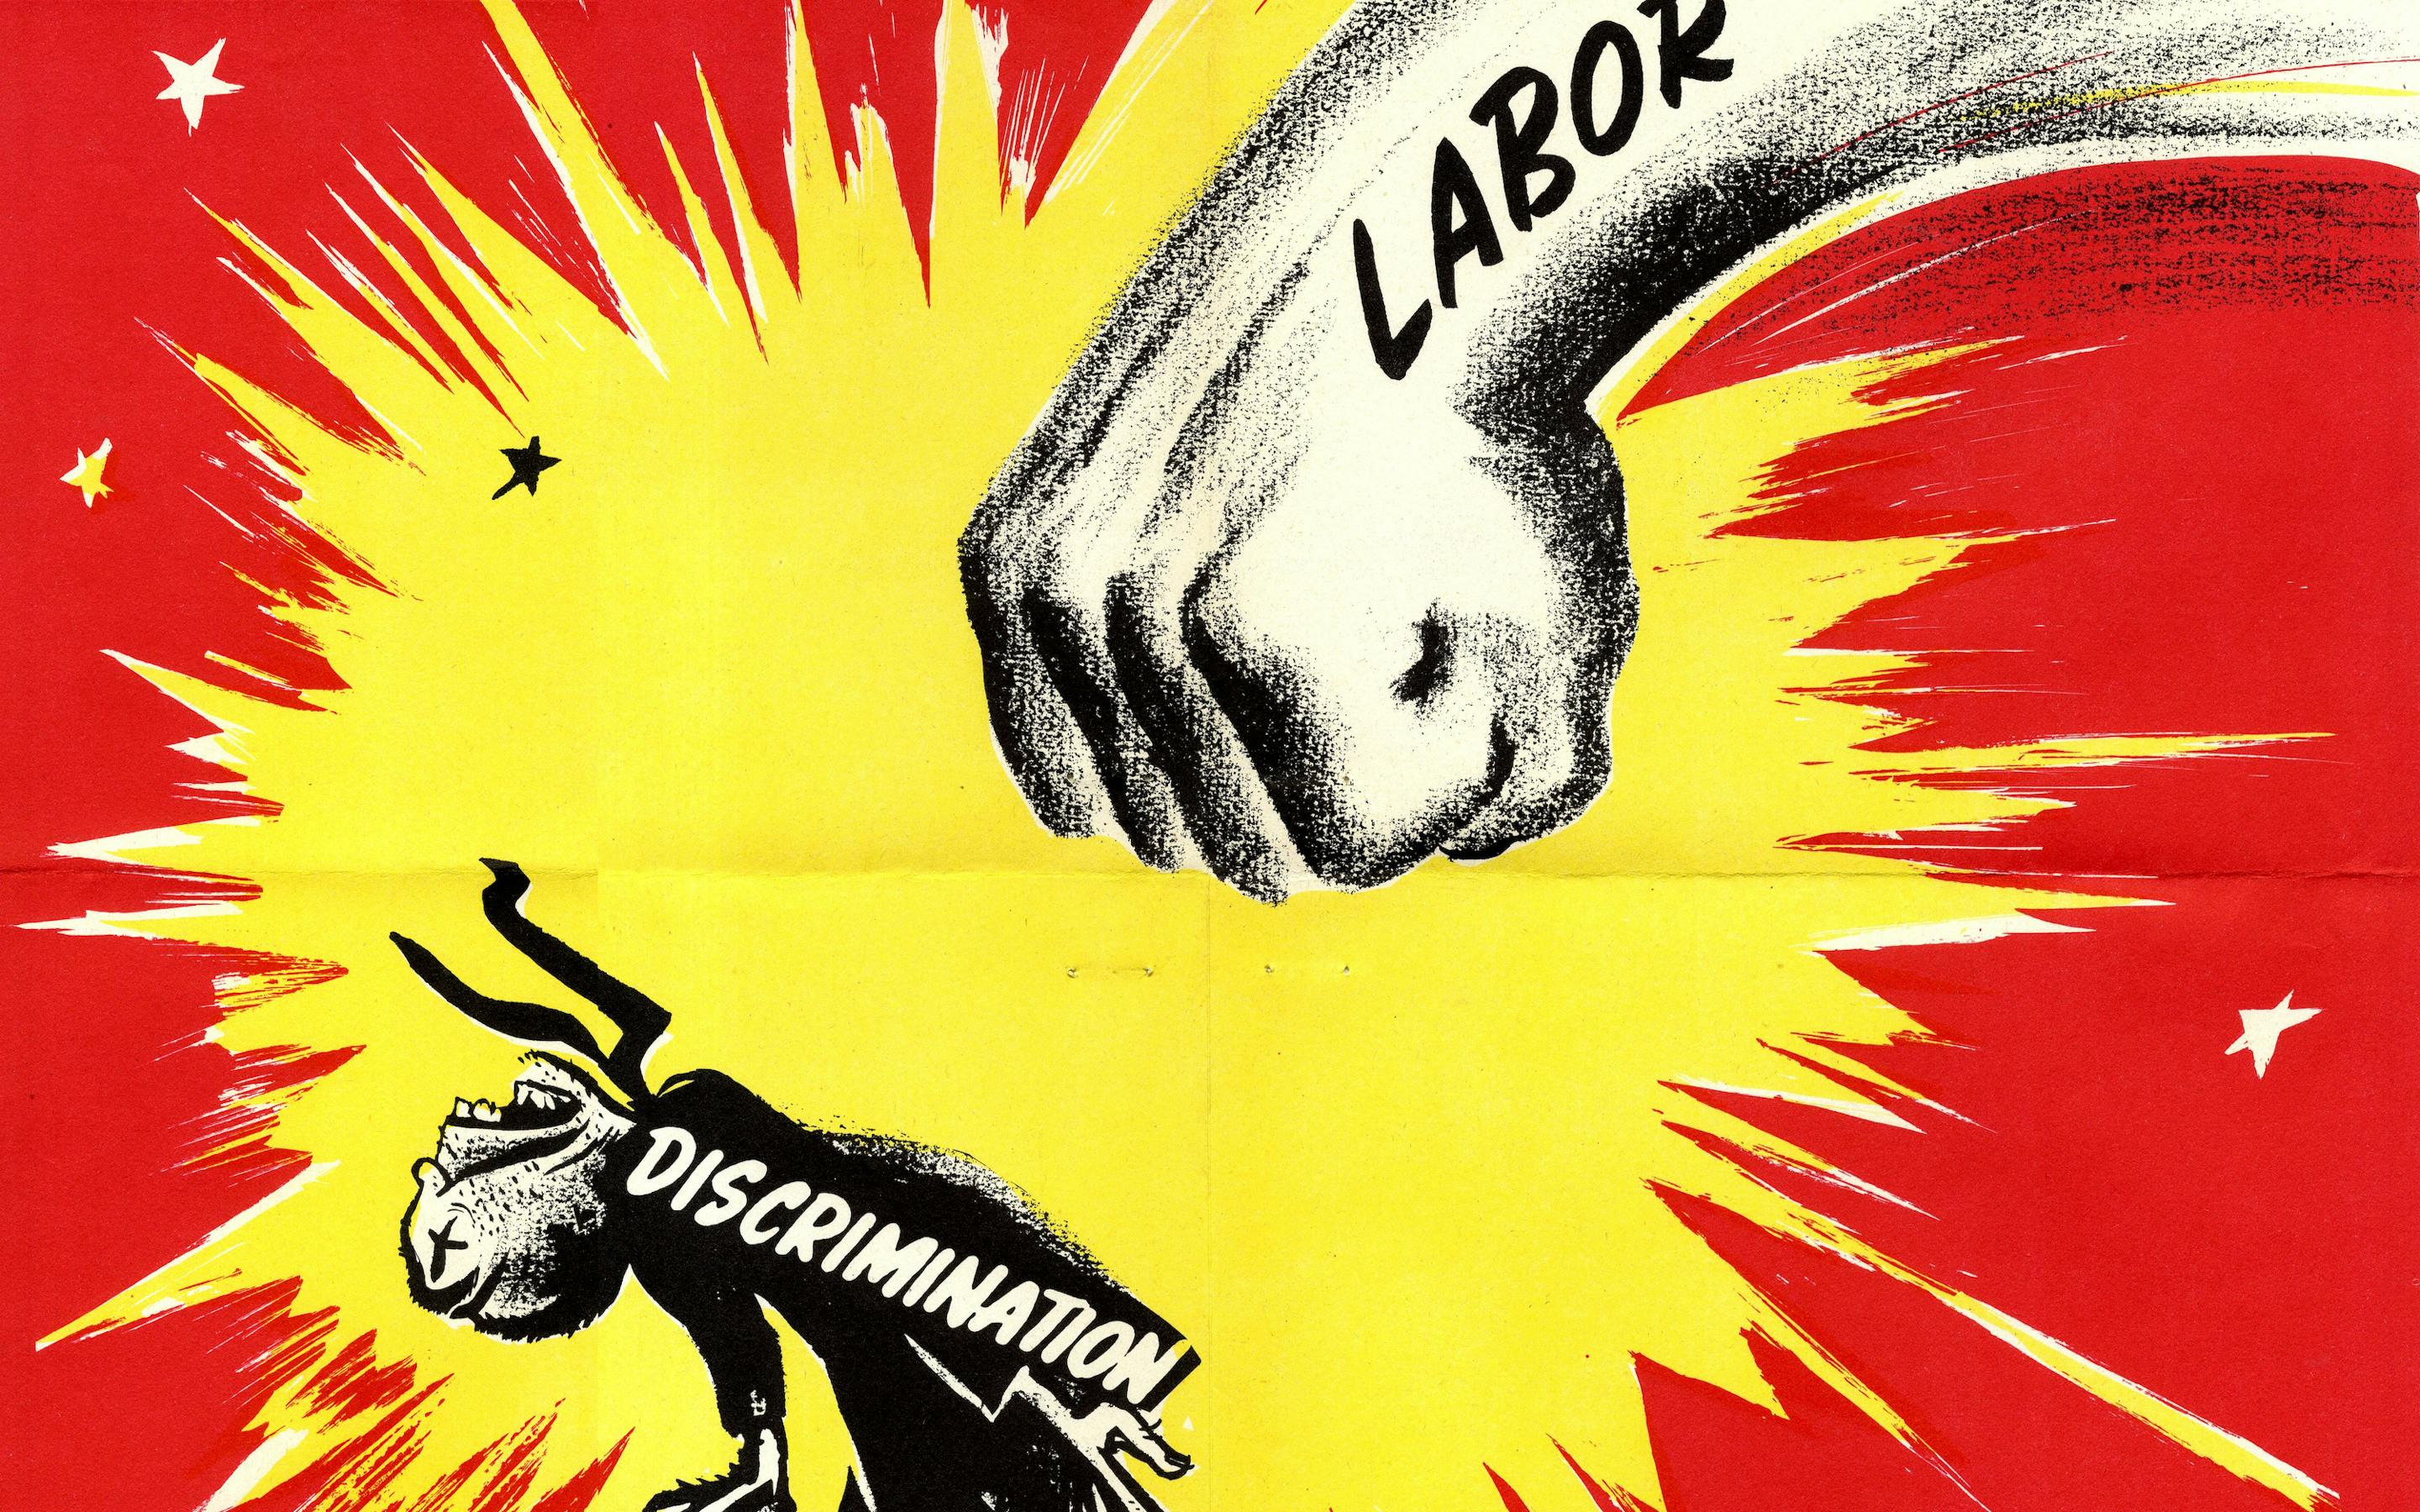 Detail of the Bernard Seaman poster for the American Jewish Committee, “Discrimination: Knock Him Out!”. Collection of the American Jewish Committee